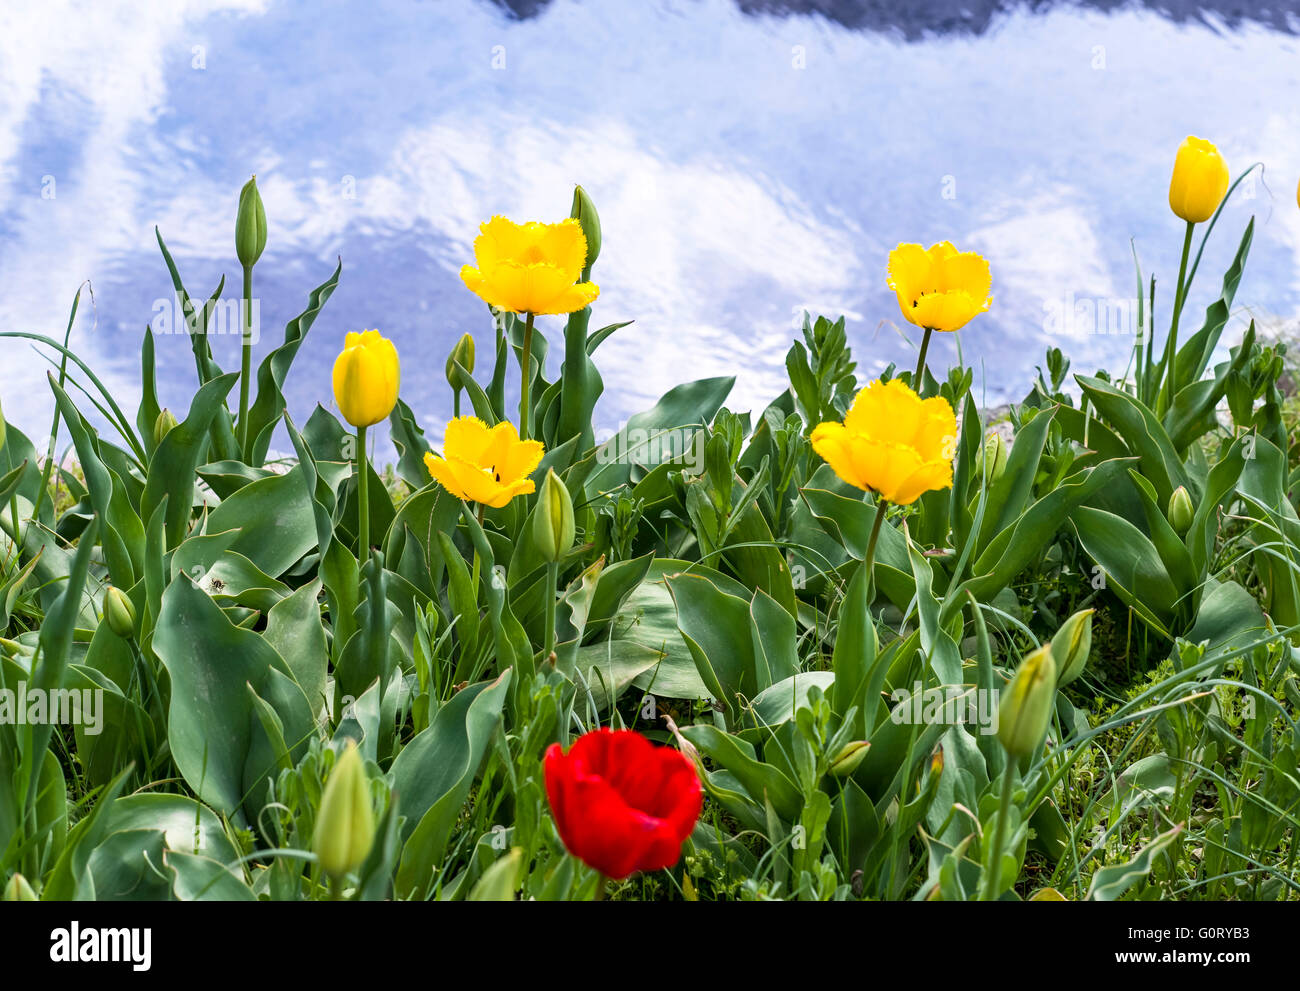 River side tulips Stock Photo